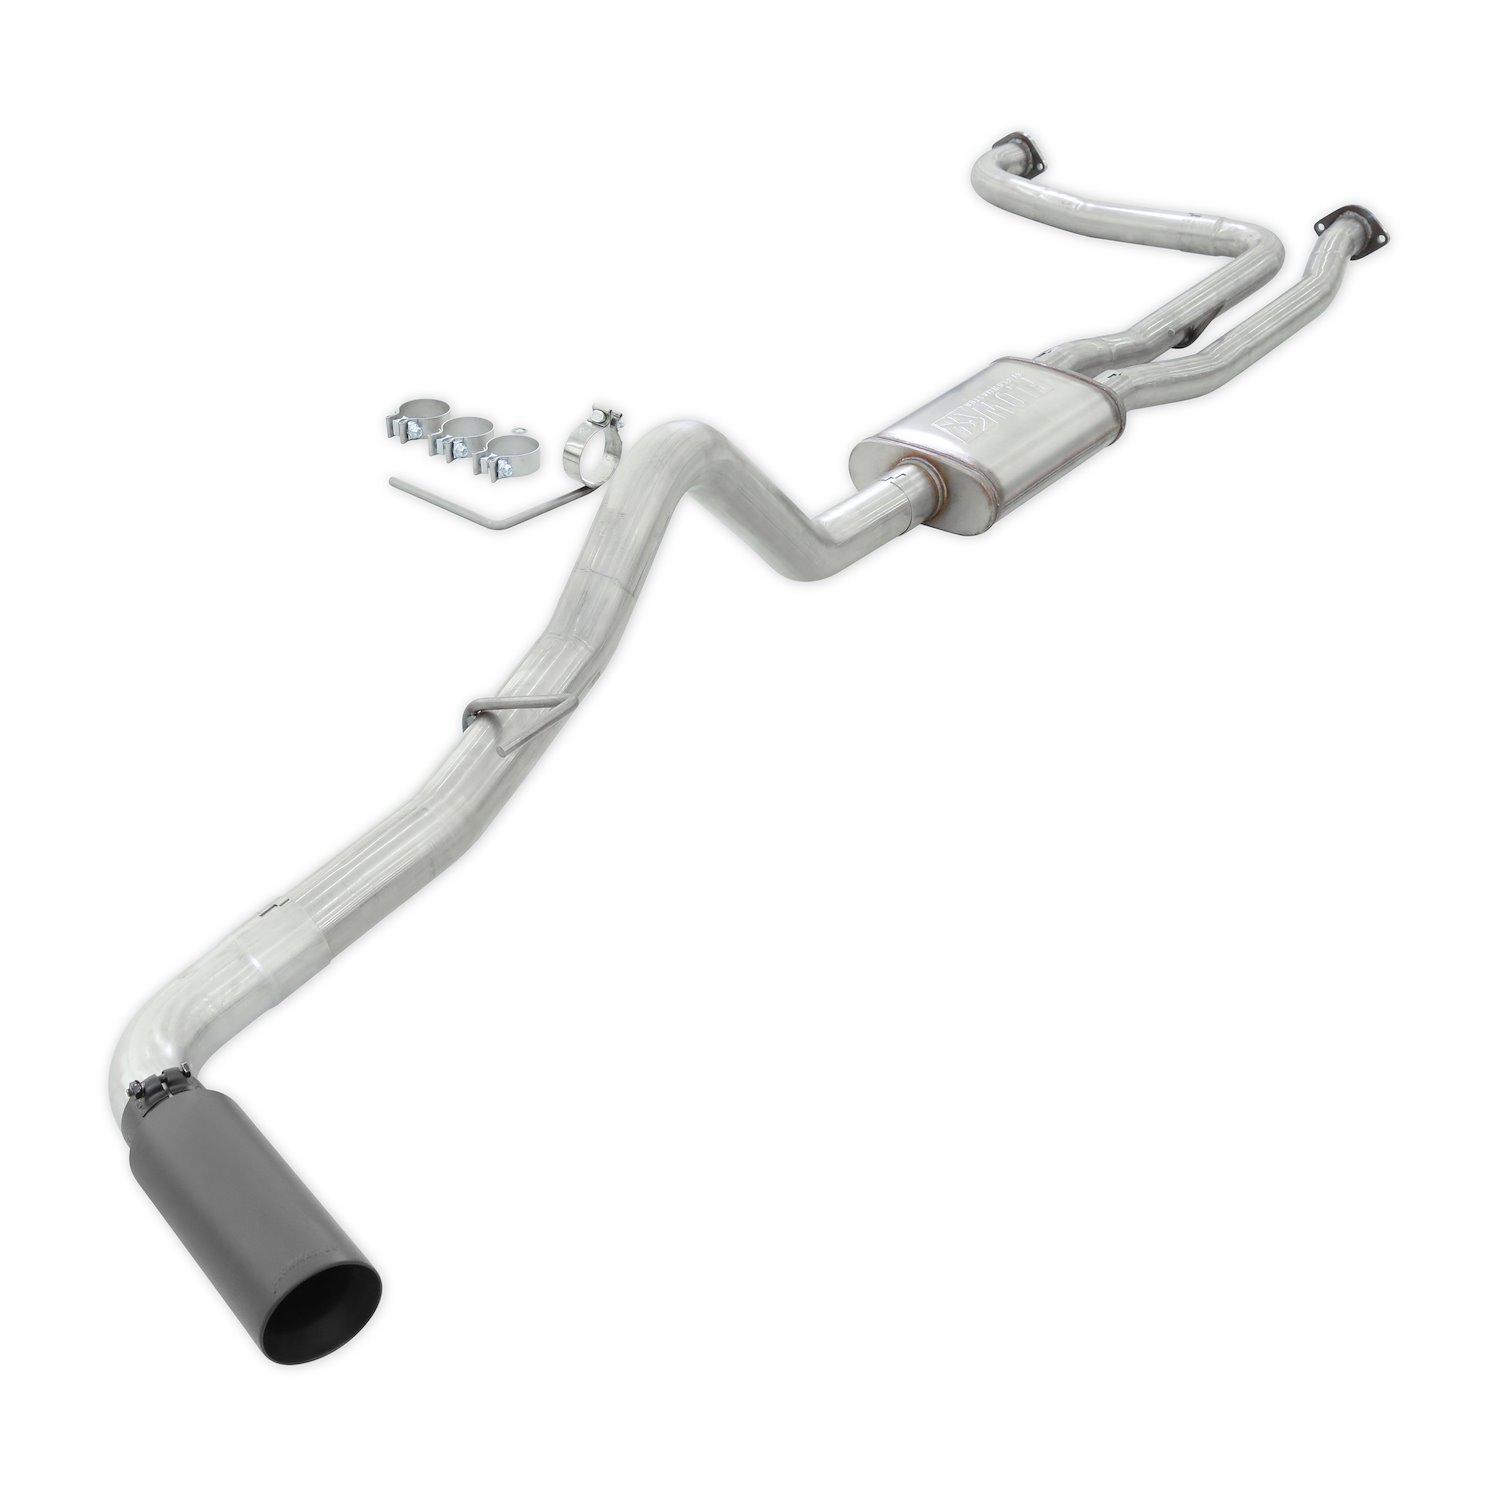 718151 FlowFX Cat-Back Exhaust System Fits Nissan Frontier